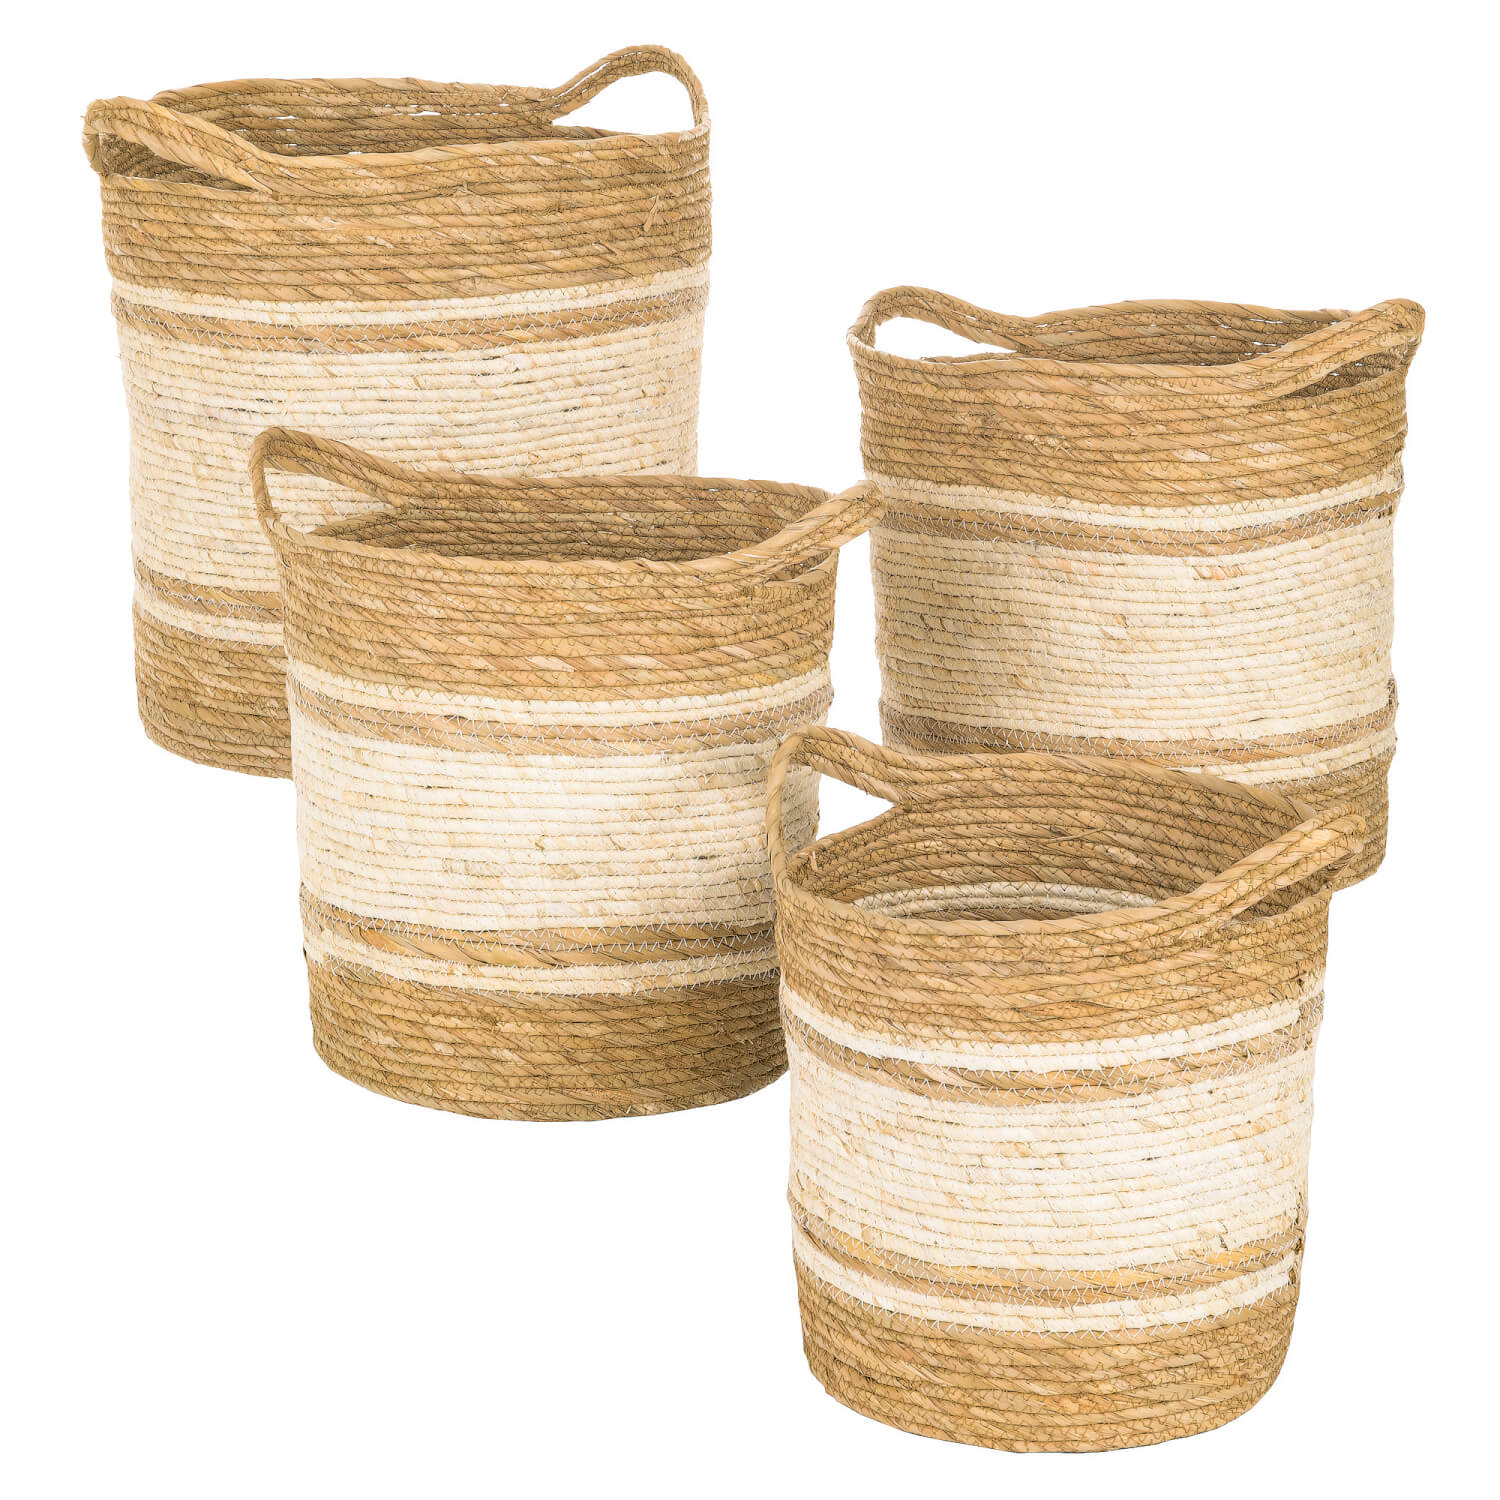 Woven Handled Tote Baskets Set of 4  - Online Only